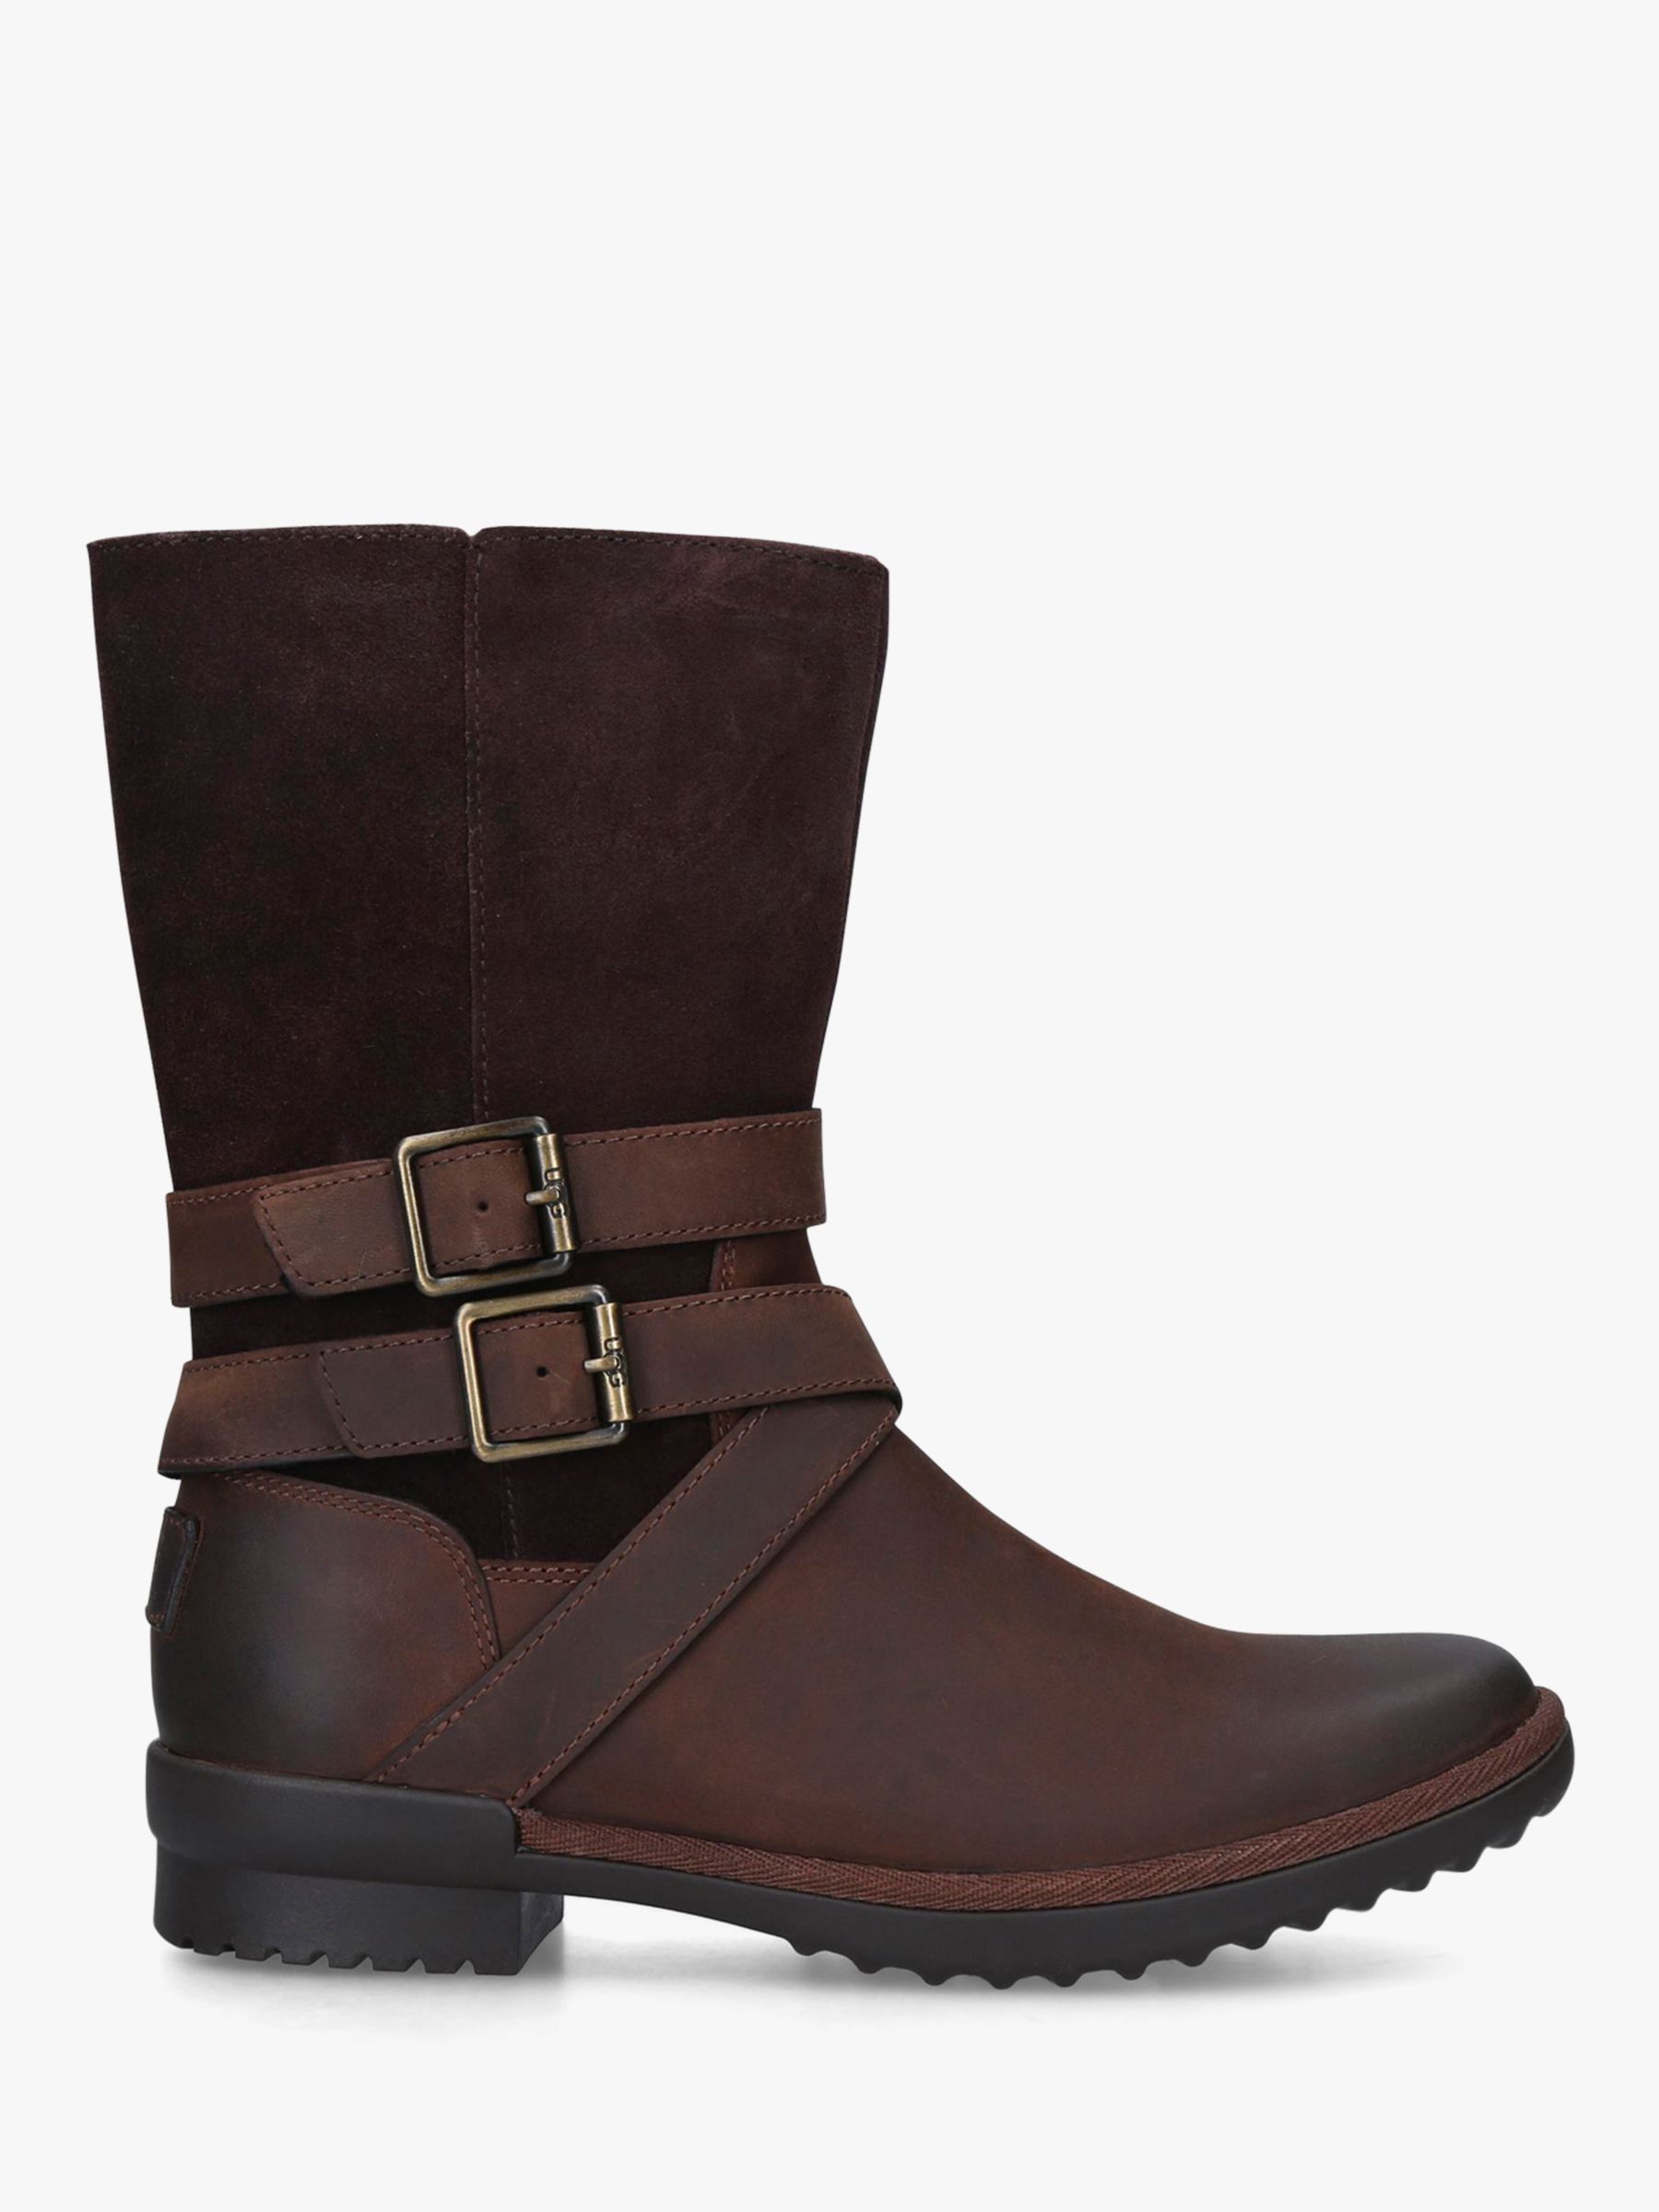 brown leather ugg boots with buckle